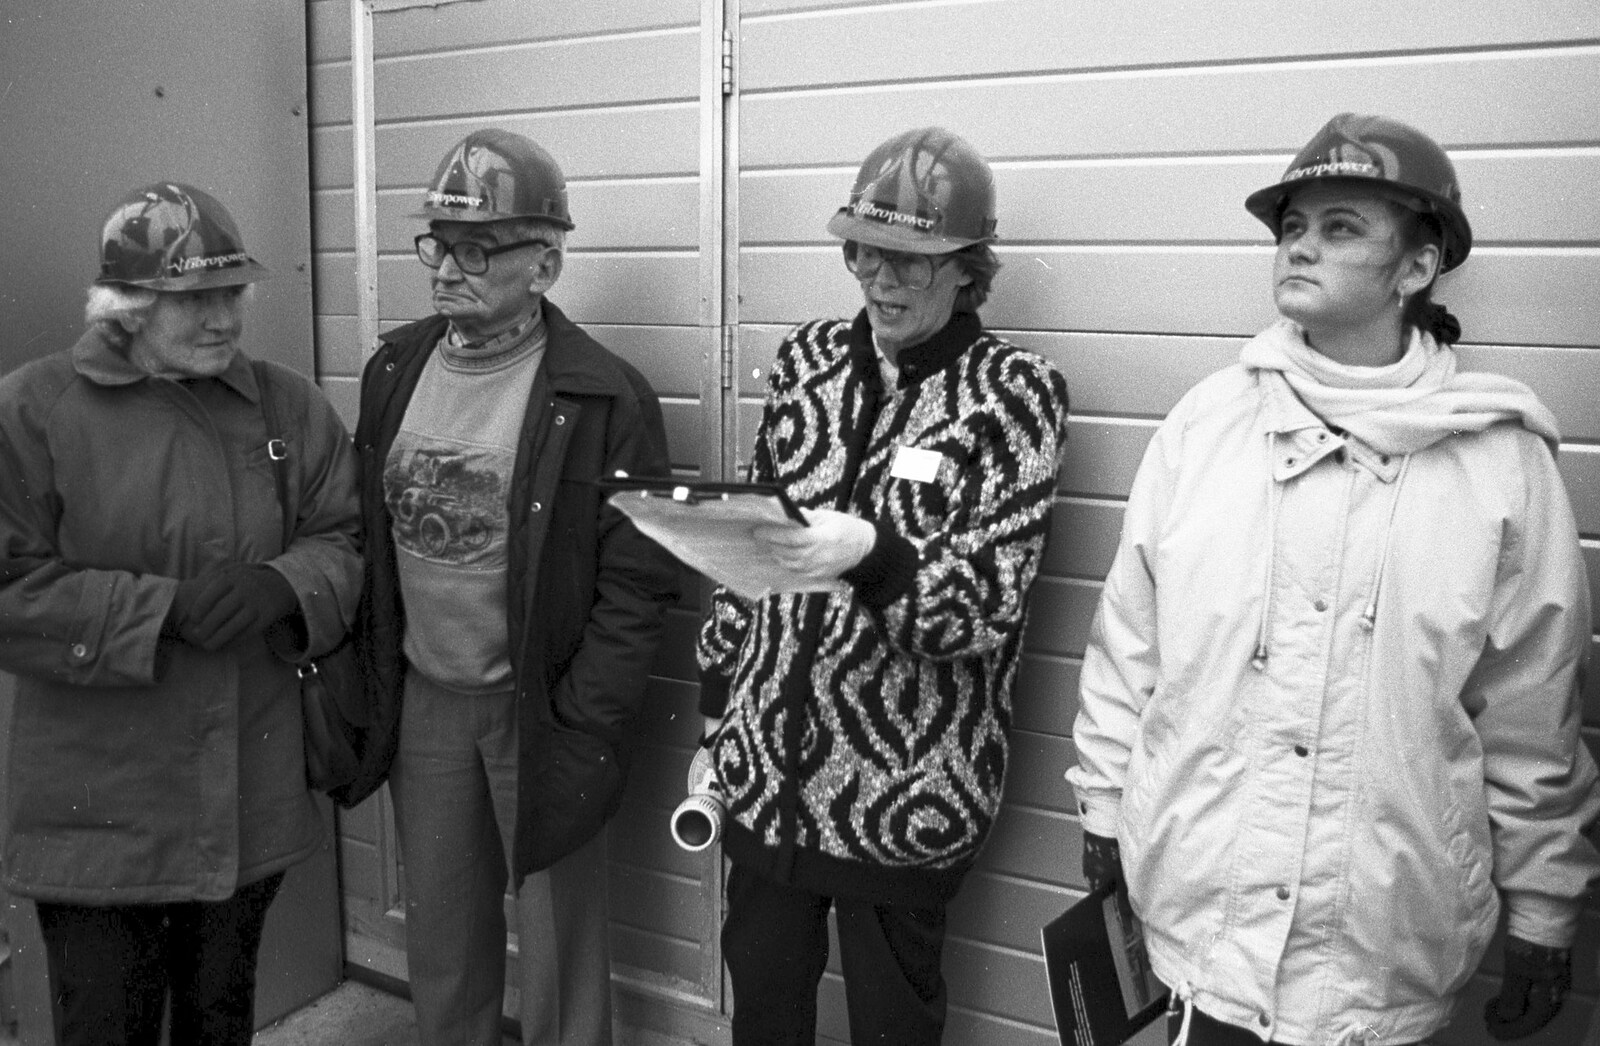 The World's First "Chicken Shit" Power Station, Brome, Eye, Suffolk - 11th July 1992: The tour guide reads something out